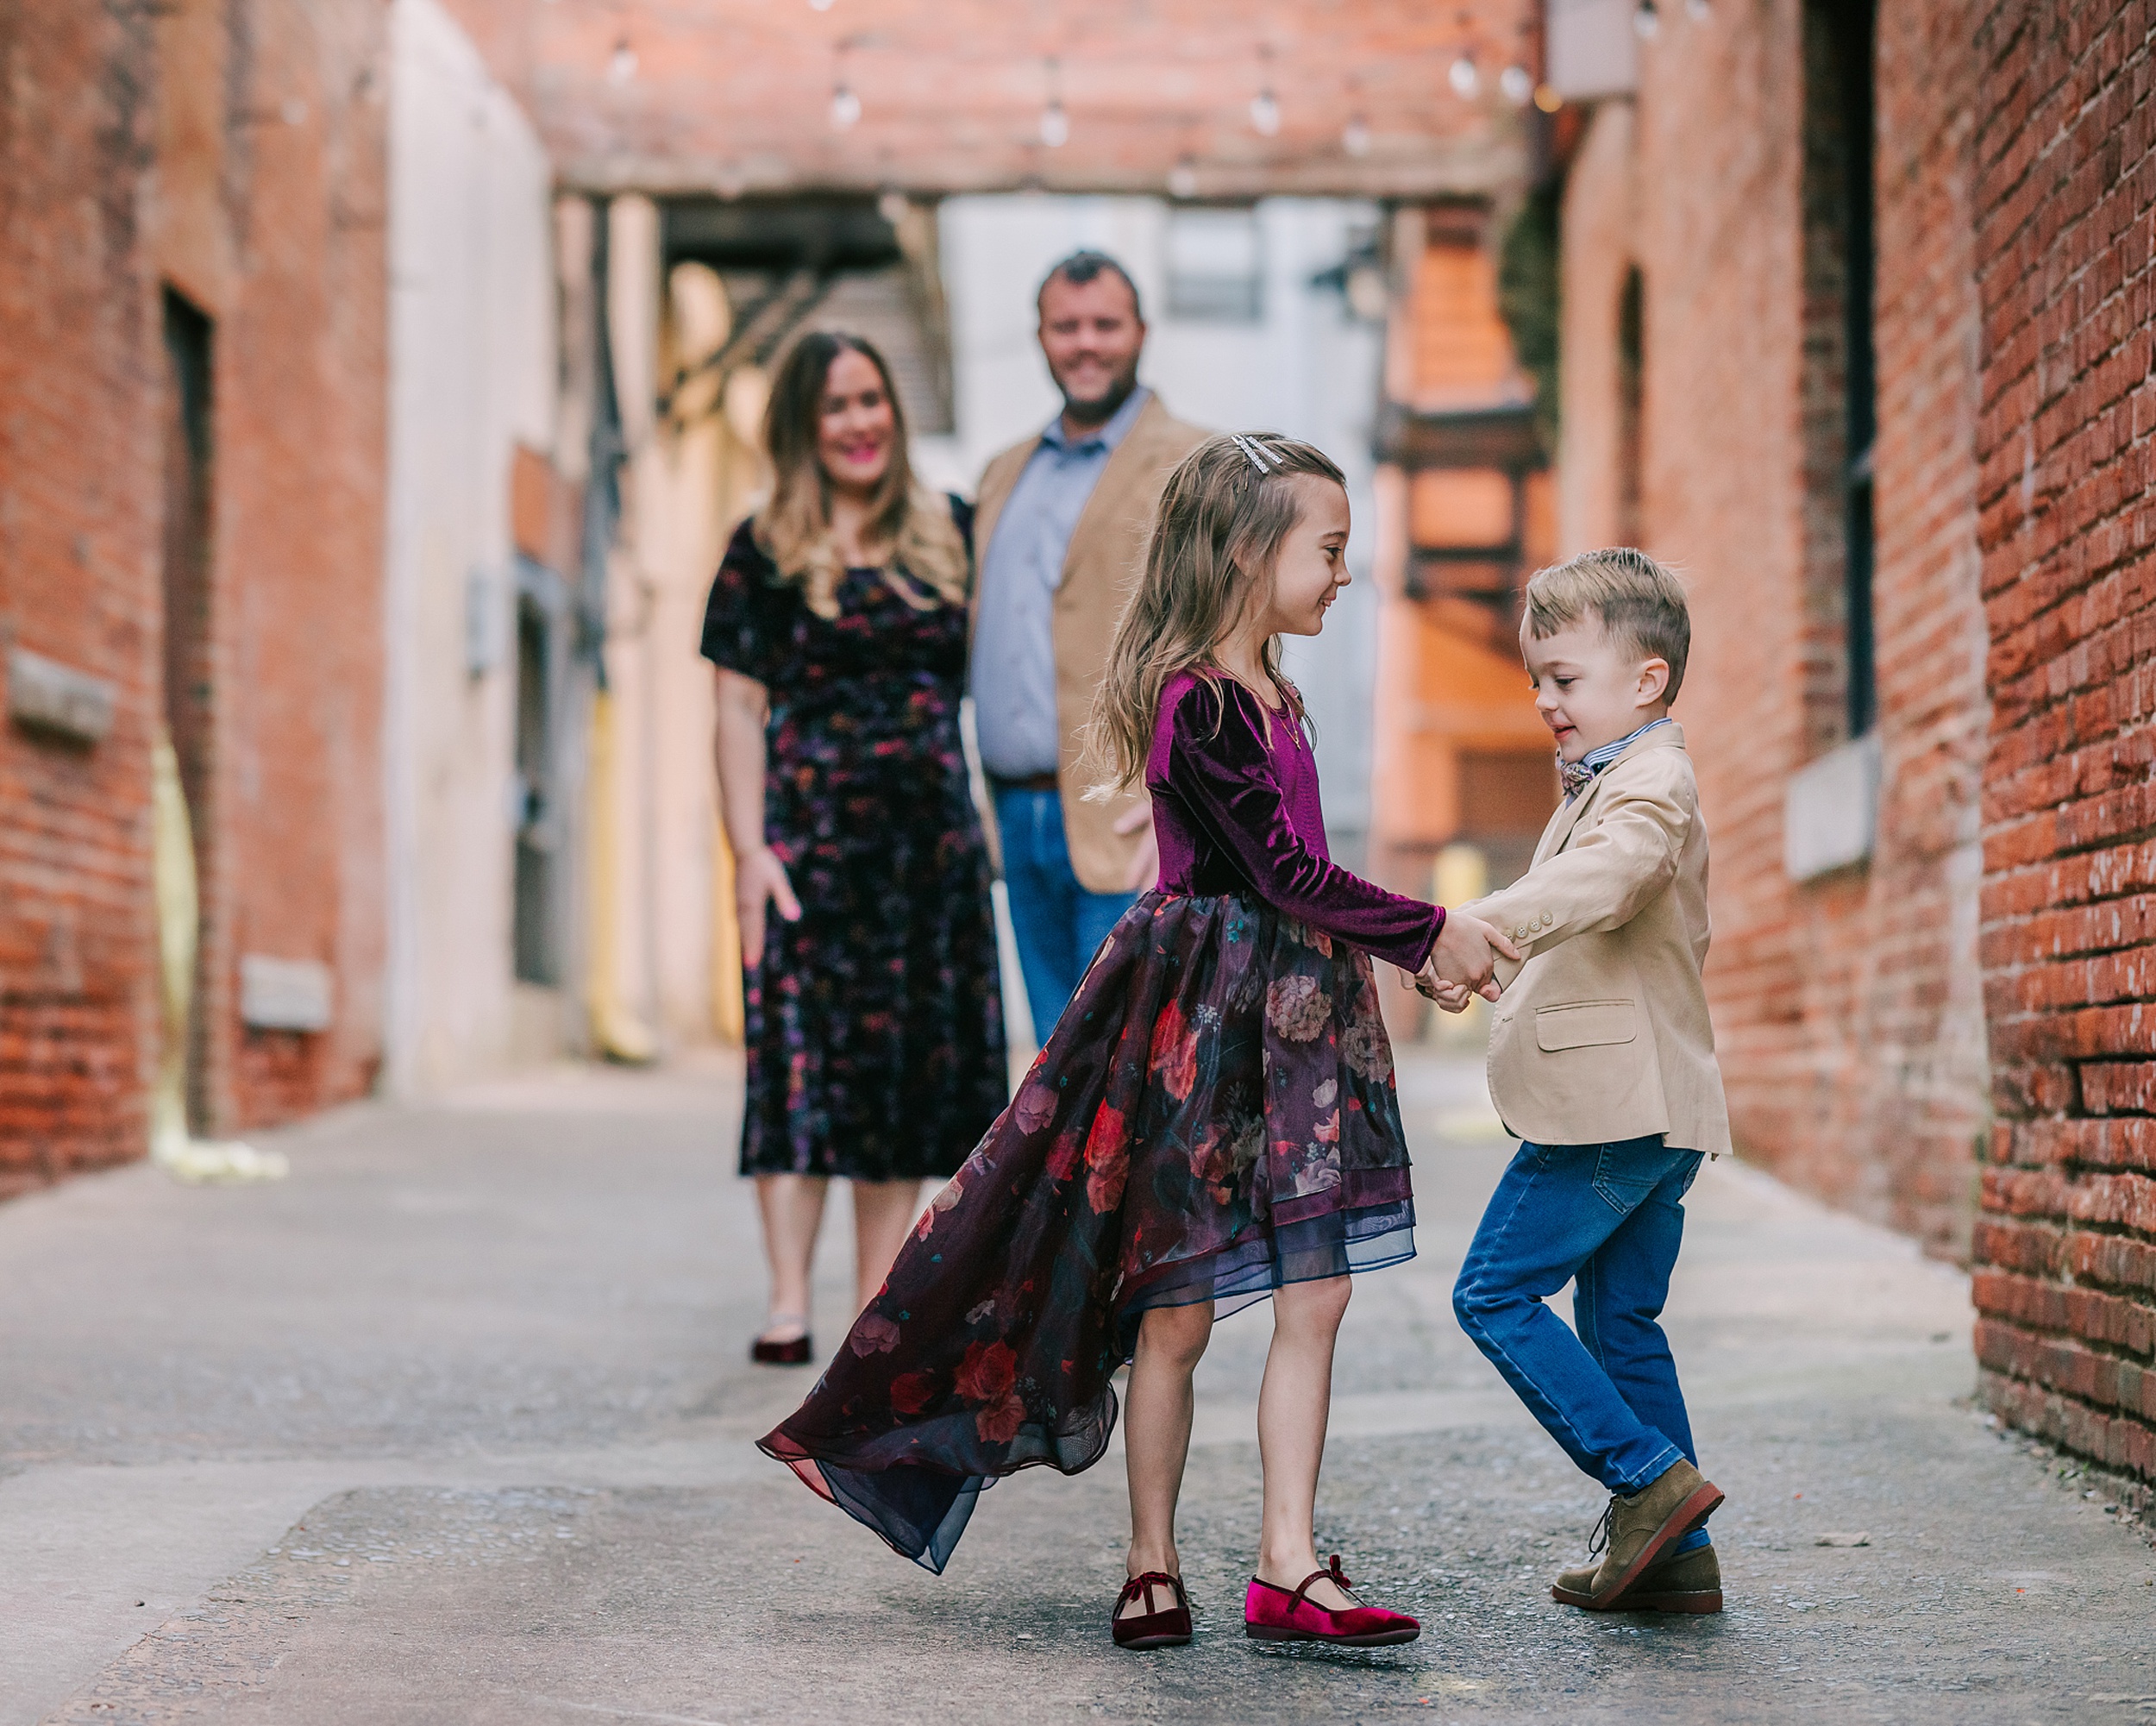 A young brother and sister dance in a alley while mom and dad in matching outfits stand behind them